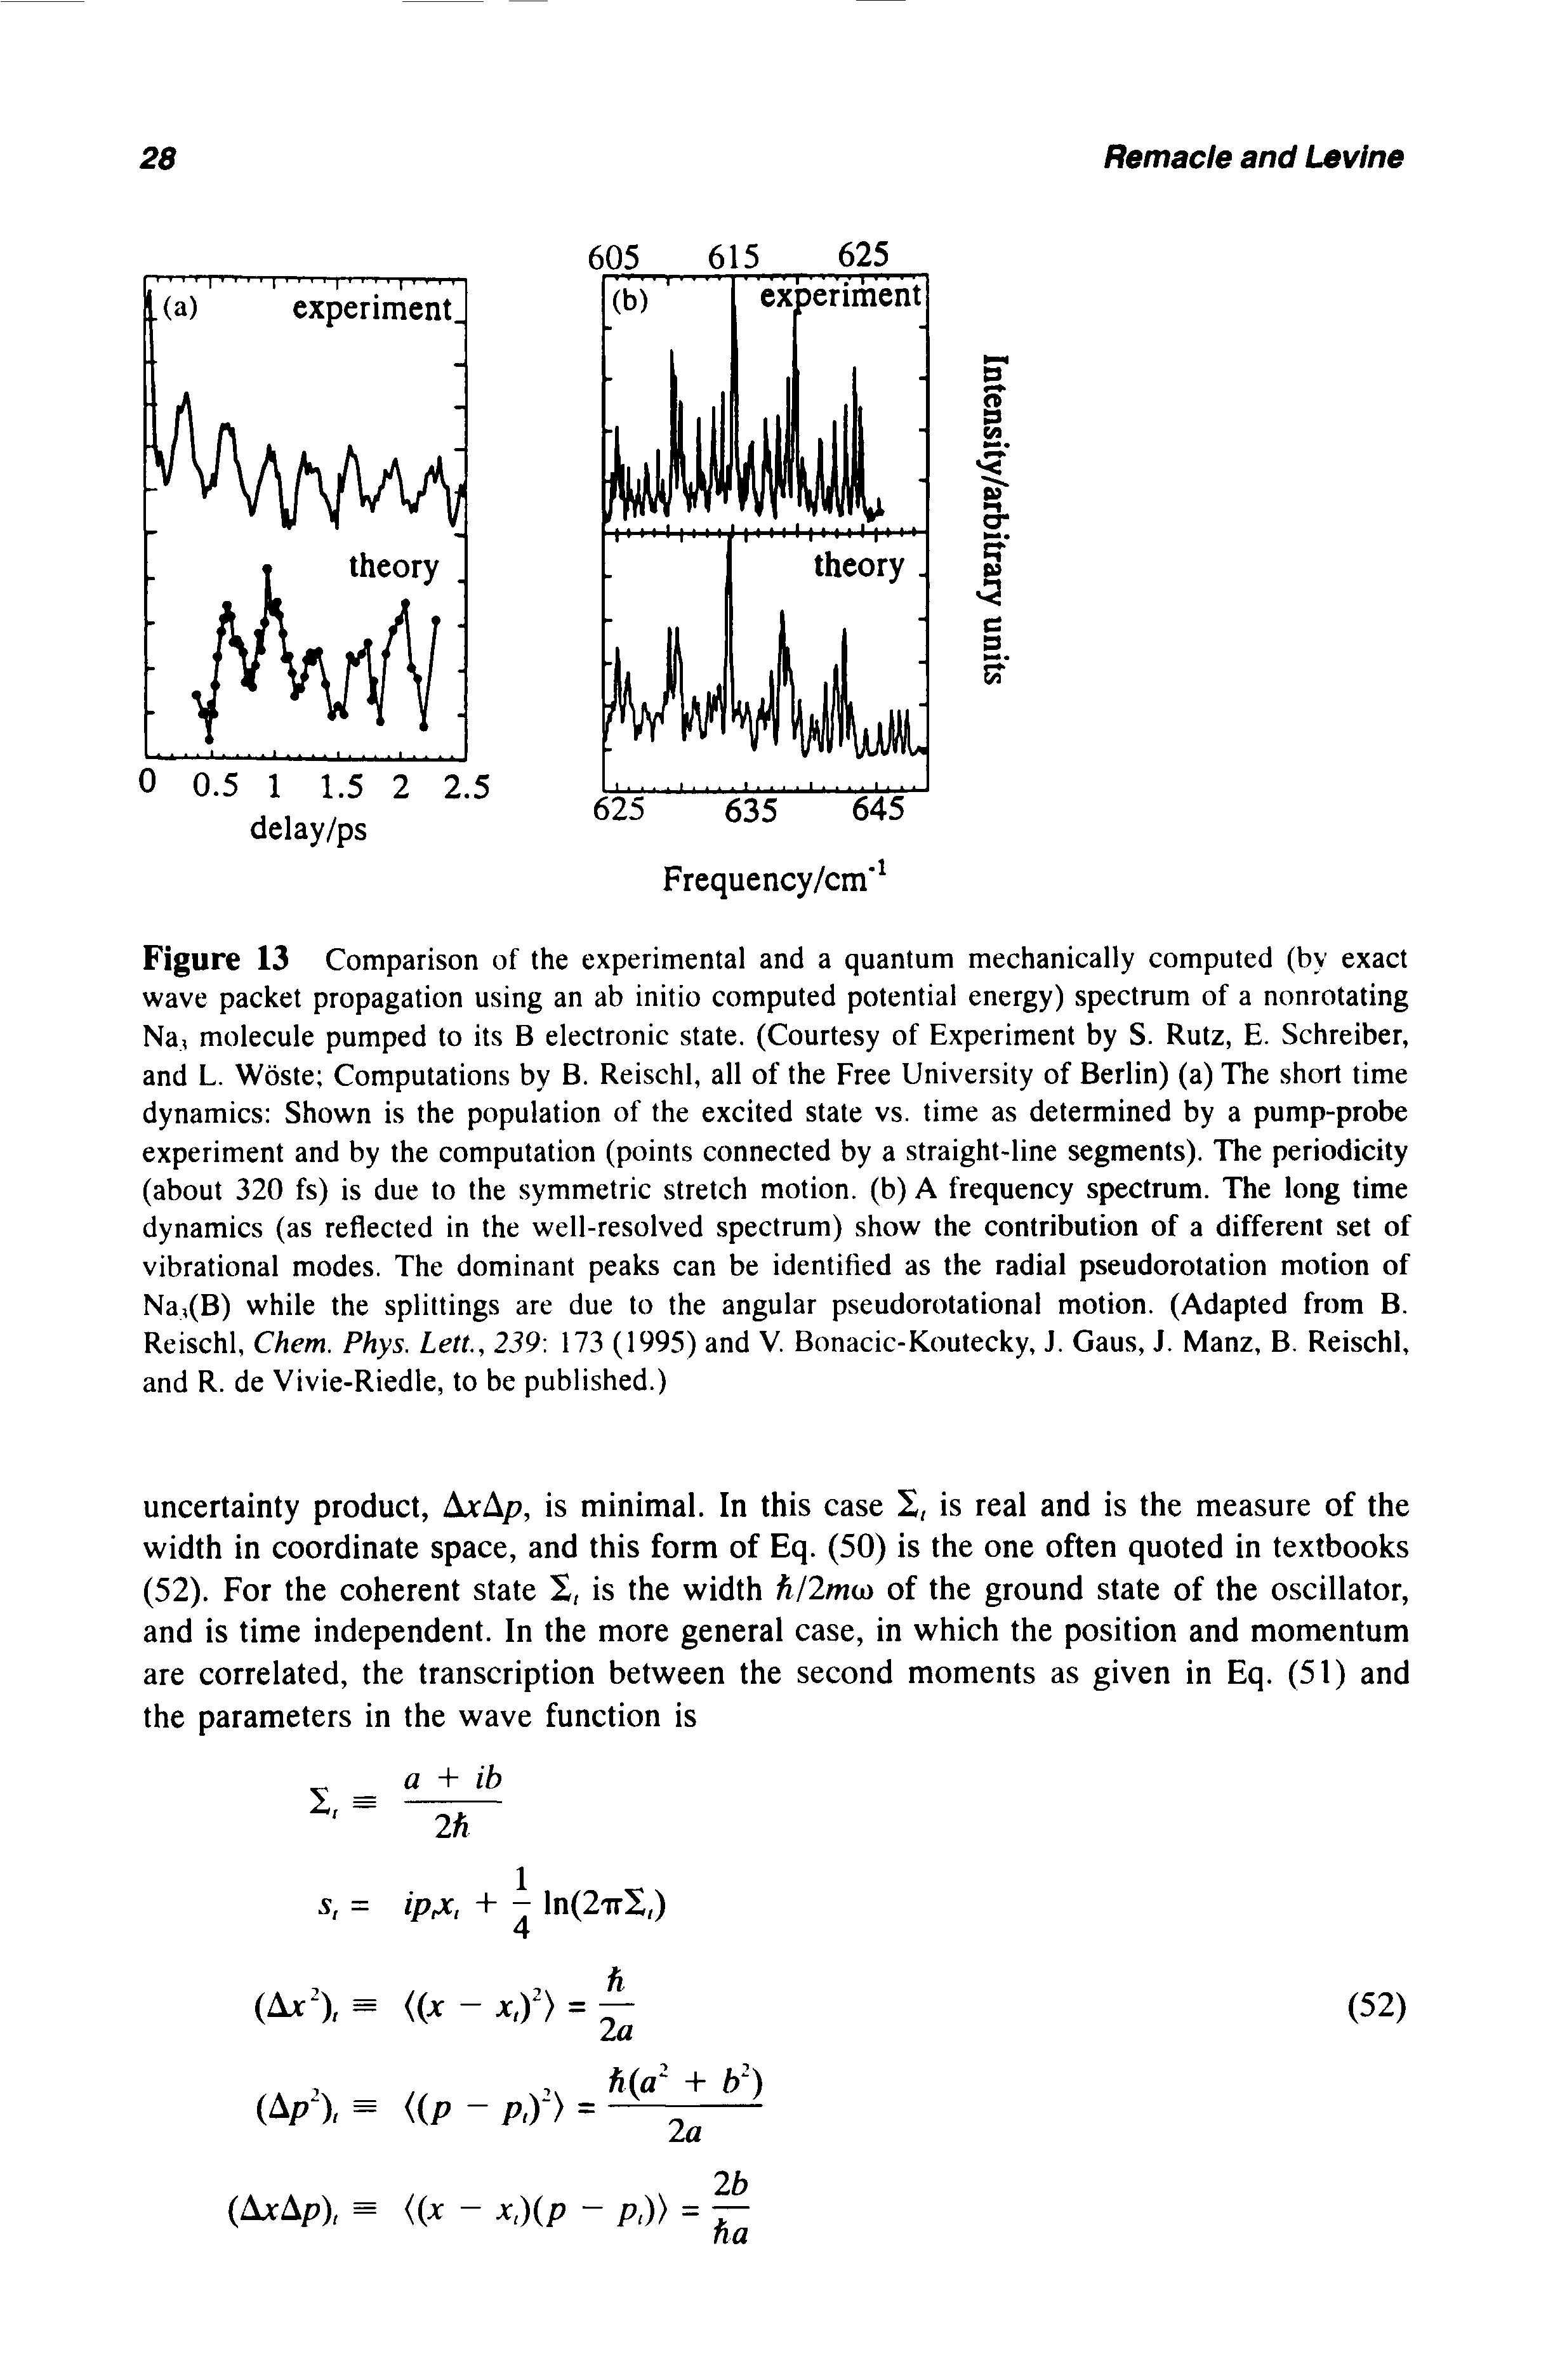 Figure 13 Comparison of the experimental and a quantum mechanically computed (by exact wave packet propagation using an ab initio computed potential energy) spectrum of a nonrotating Na, molecule pumped to its B electronic state. (Courtesy of Experiment by S. Rutz, E. Schreiber, and L. Woste Computations by B. Reischl, all of the Free University of Berlin) (a) The short time dynamics Shown is the population of the excited state vs. time as determined by a pump-probe experiment and by the computation (points connected by a straight-line segments). The periodicity (about 320 fs) is due to the symmetric stretch motion, (b) A frequency spectrum. The long time dynamics (as reflected in the well-resolved spectrum) show the contribution of a different set of vibrational modes. The dominant peaks can be identified as the radial pseudorotation motion of Na,(B) while the splittings are due to the angular pseudorotational motion. (Adapted from B. Reischl, Chem. Phys. Lett., 239 173 (1995) and V. Bonacic-Koutecky, J. Gaus, J. Manz, B. Reischl, and R. de Vivie-Riedle, to be published.)...